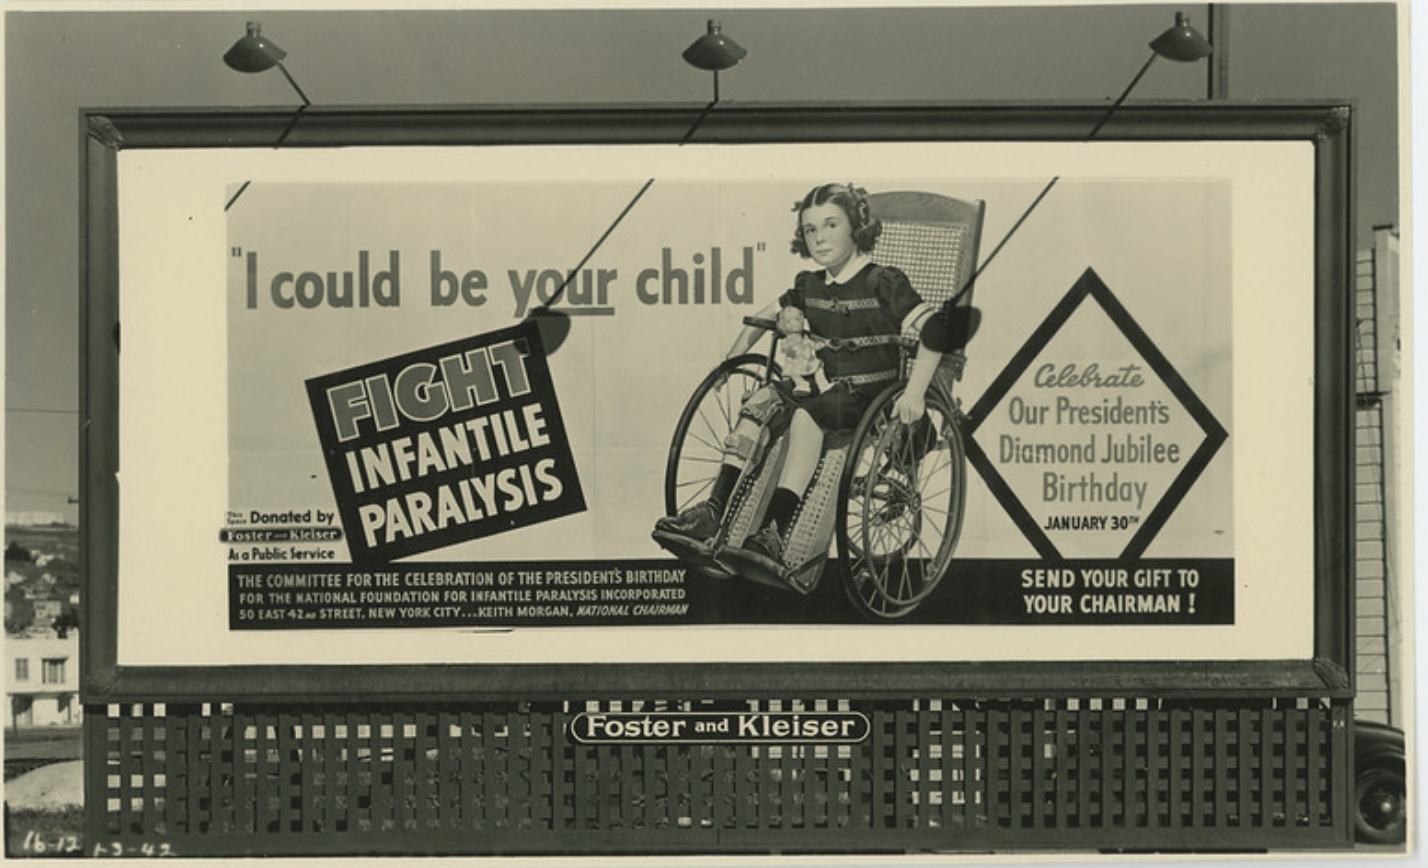 Billboard sponsored by the National Foundation for Infantile Paralysis (later March of Dimes)